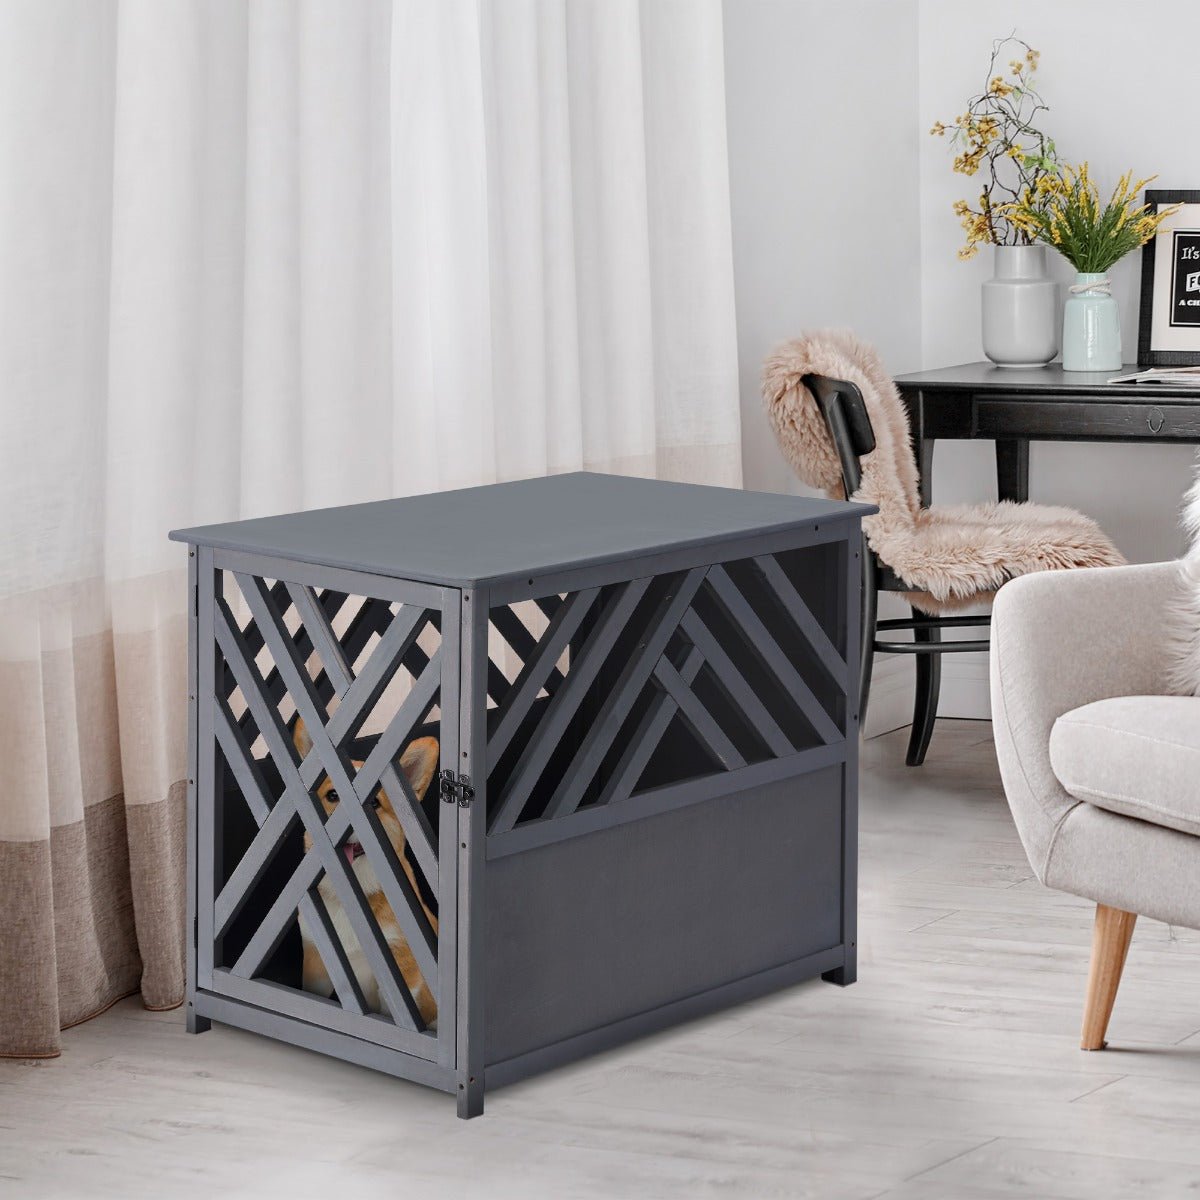 Pet Supplies-Wood Dog Crate Small Dog Cage, Furniture Style Dog Kennel Lattice for Indoor Use with Unique Slant Aesthetic Design, Gray - Outdoor Style Company